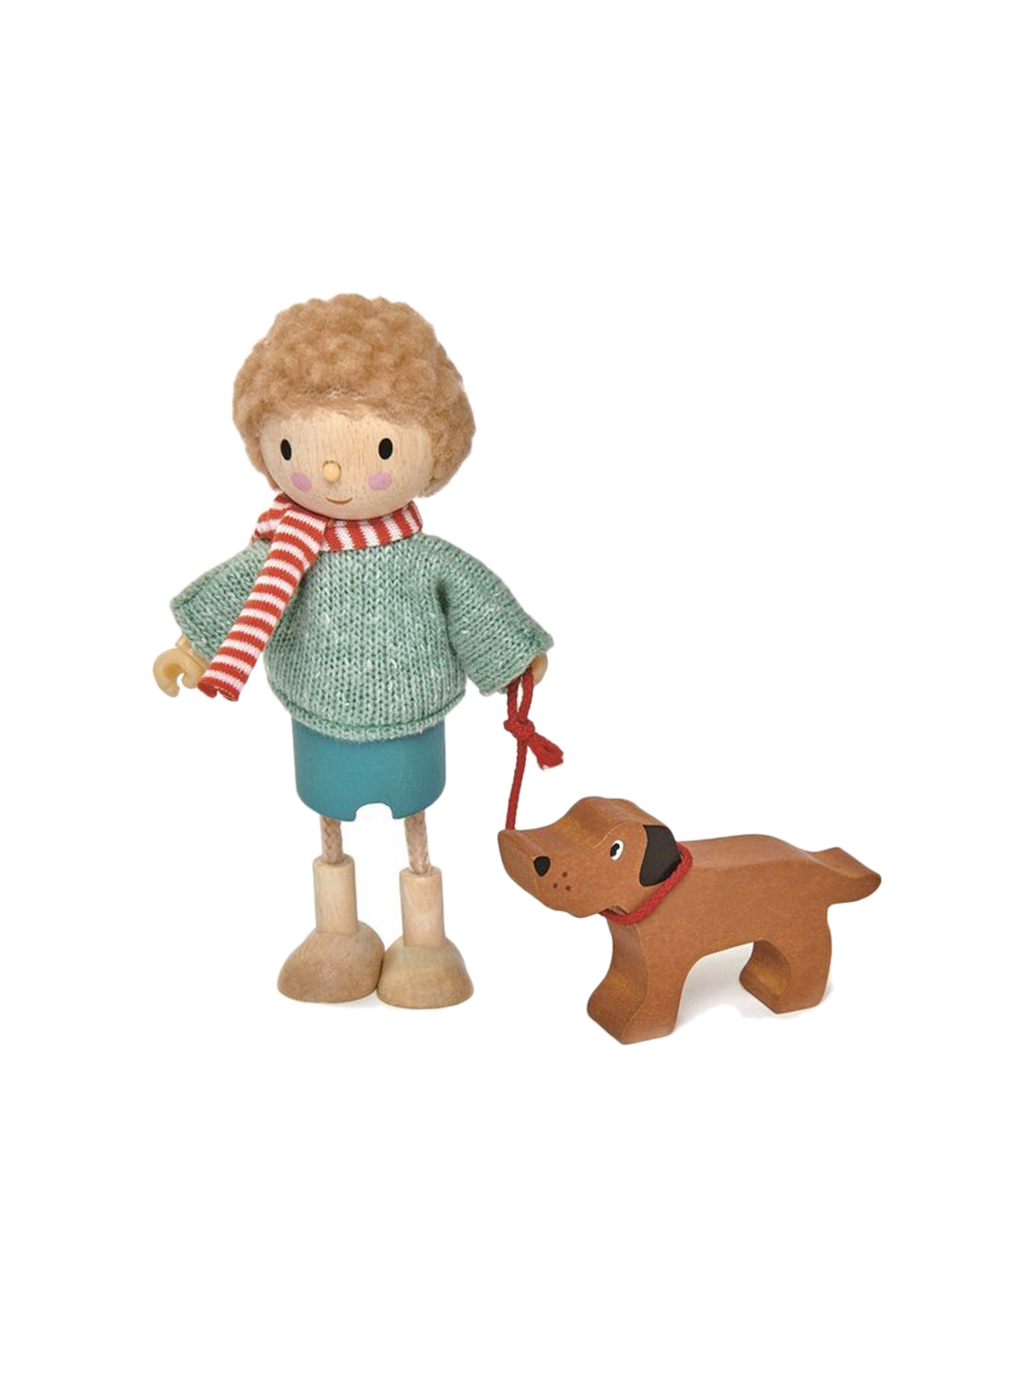 Mr. Goodwood with his dog wooden doll